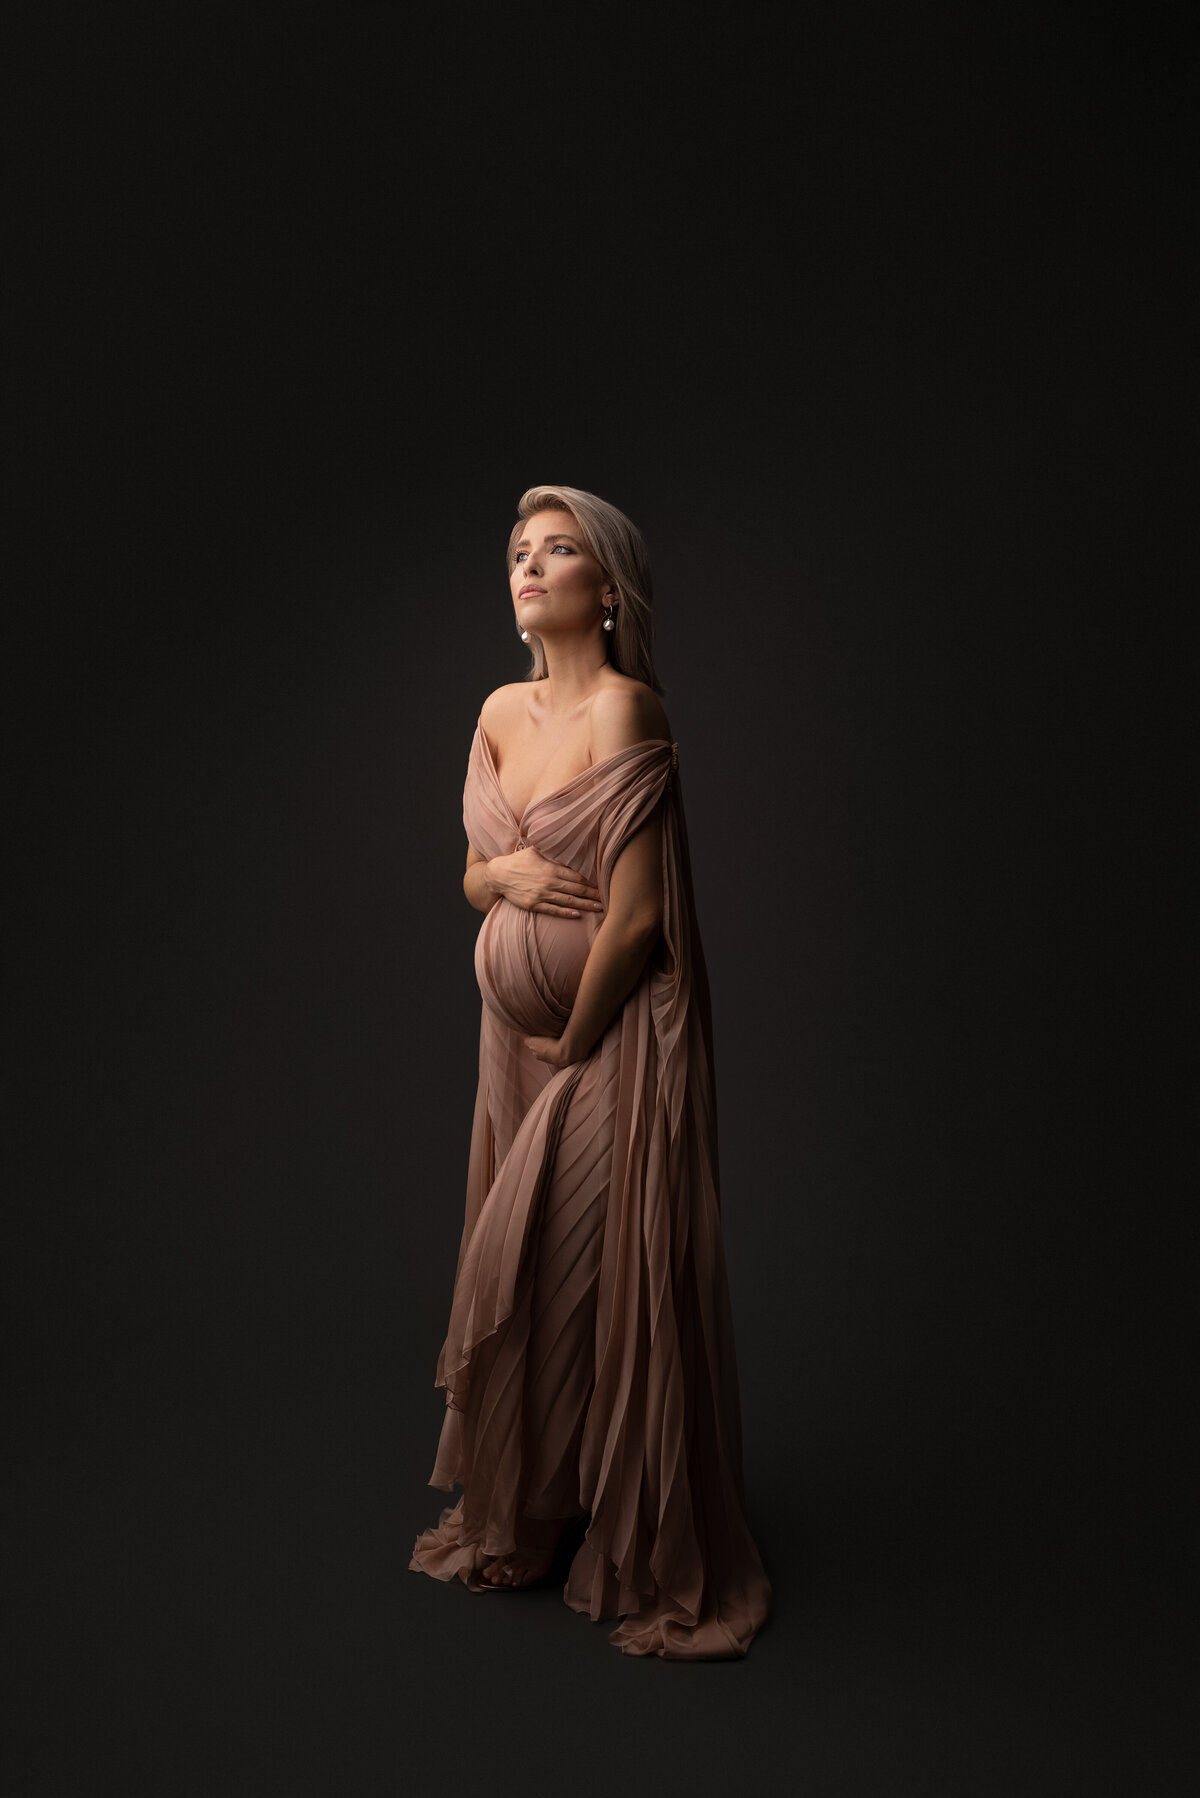 Woman poses for fine art maternity photos with New Jersey's best maternity photographer Katie Marshall. Full body image. Woman is standing in a long, dusty-rose floor-length gown with cape sleeves. One hand is under her bump, the other is over her bump. She is facing the light and looking upwards. The shadows to her right create depth to the photo.